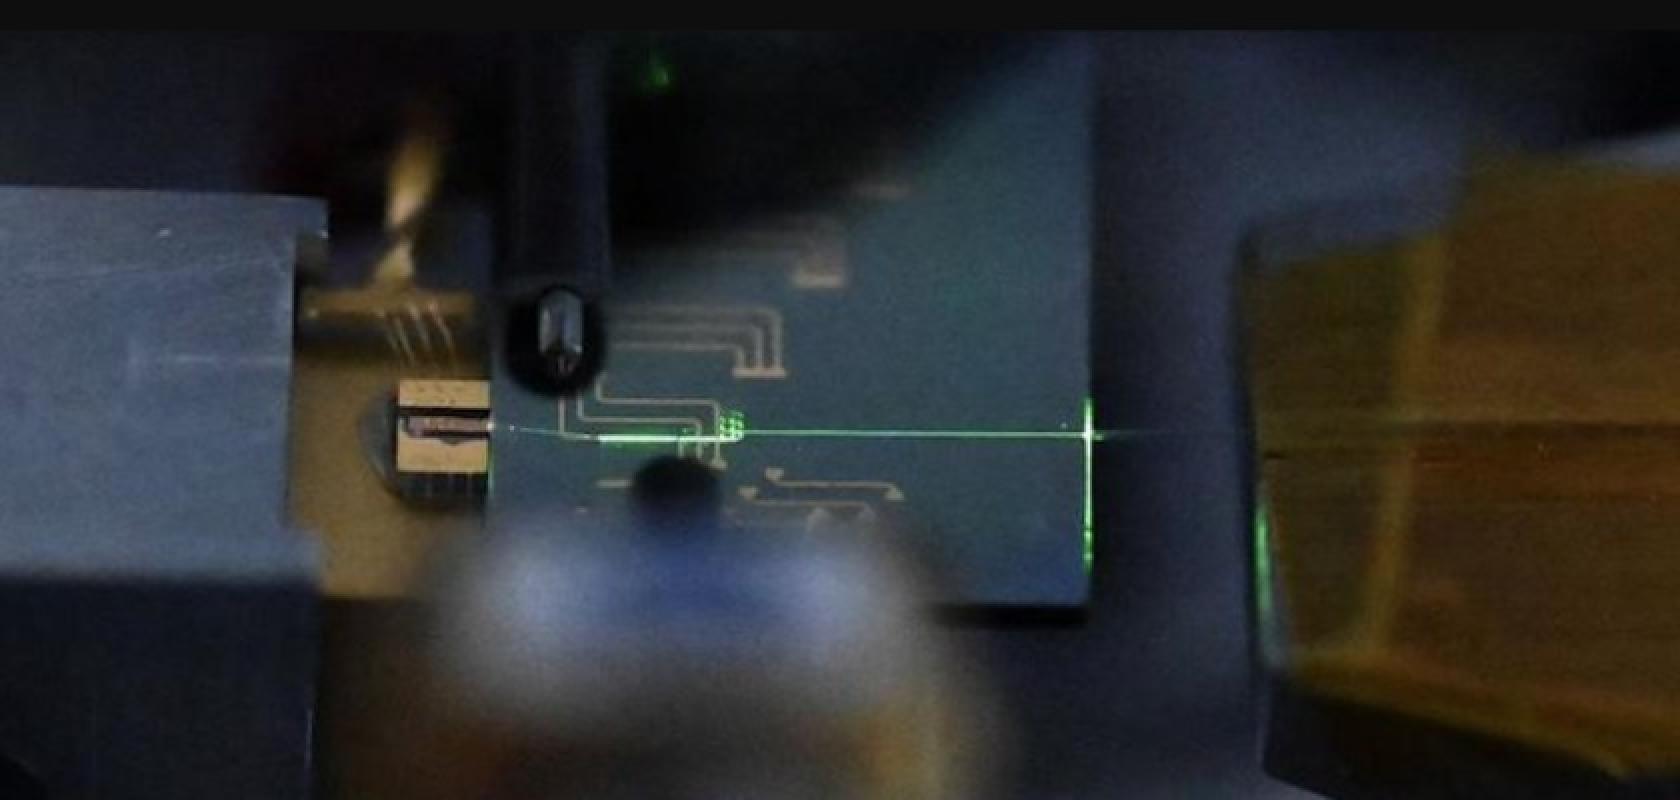 Qiushi Guo's research focused on downsizing mode-locked lasers (Image: Eurasia Review)